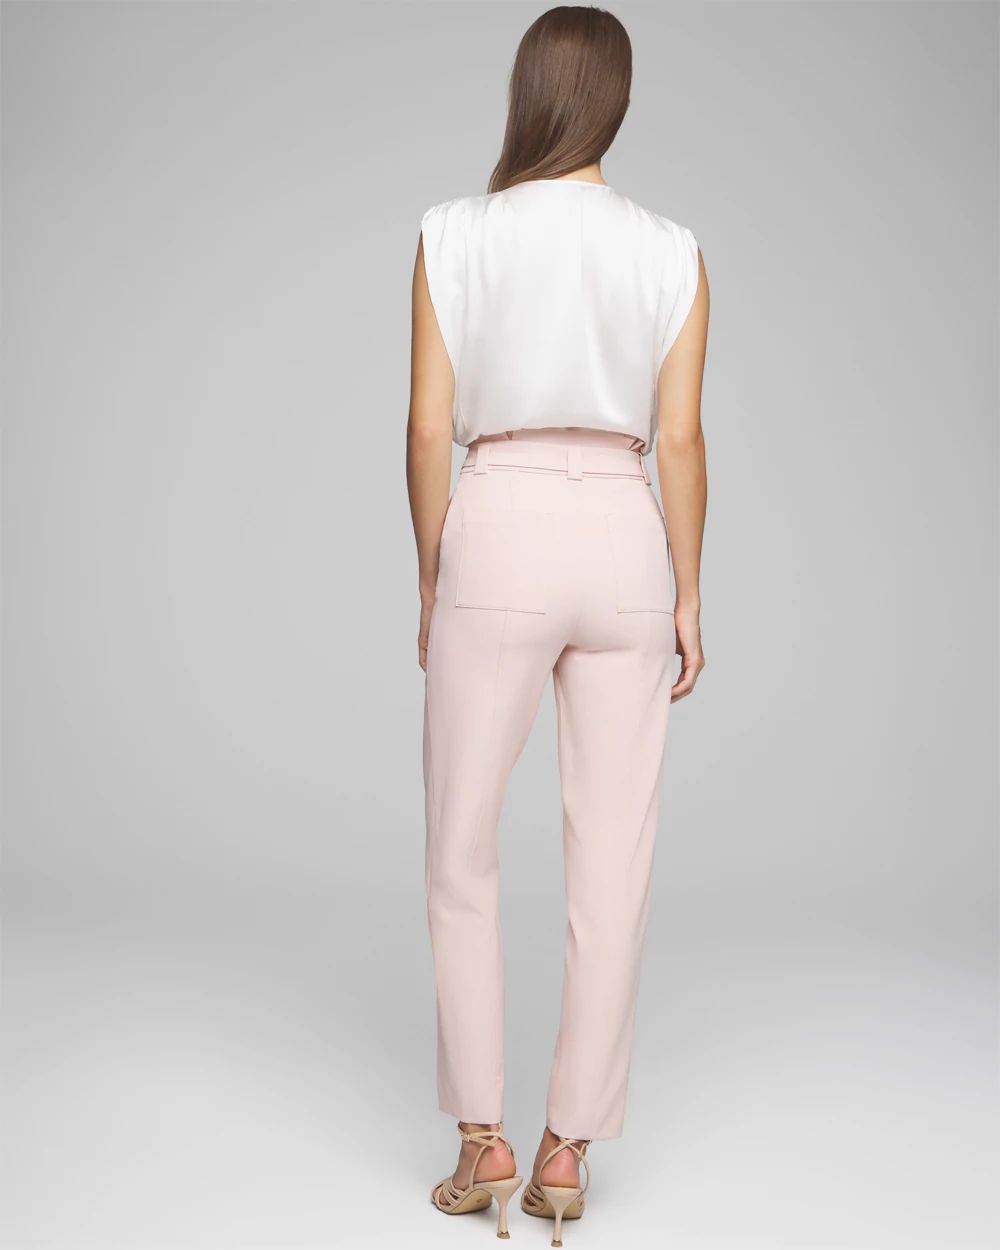 Fluid Tapered Ankle Pants click to view larger image.